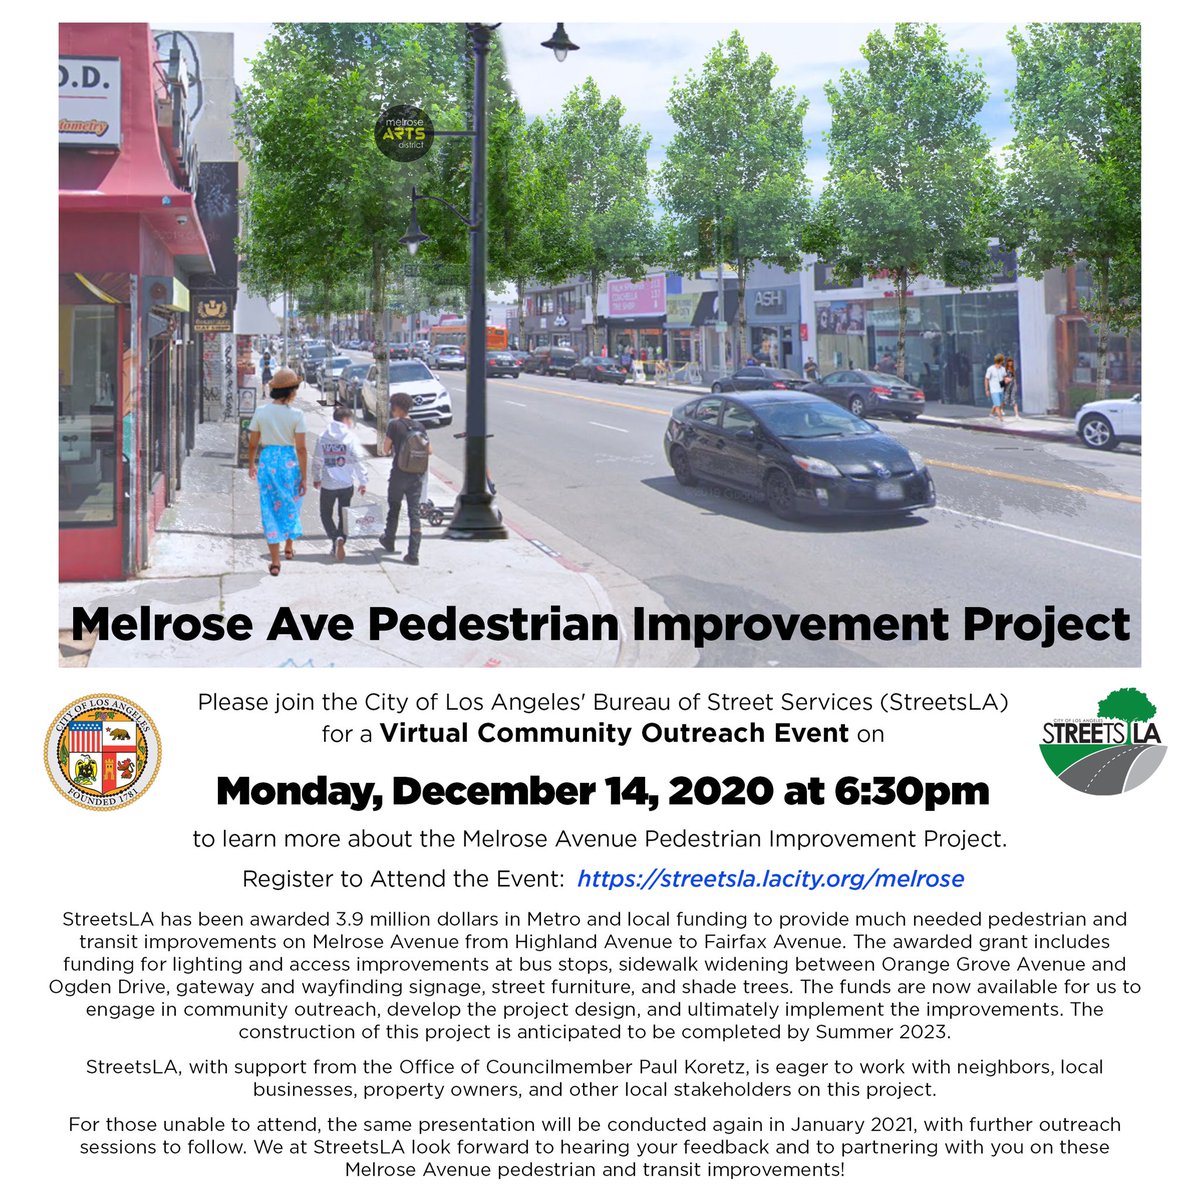 Please join us TONIGHT for a Virtual Community Outreach Event. Monday, December 14, 2020 at 6:30pm, to learn more about the Melrose Avenue Pedestrian Improvement Project.  Register to Attend the Event: streetsla.lacity.org/melrose @GMsTREEtsLA1H2O @LACityDPW #cd5 @PaulKoretzCD5